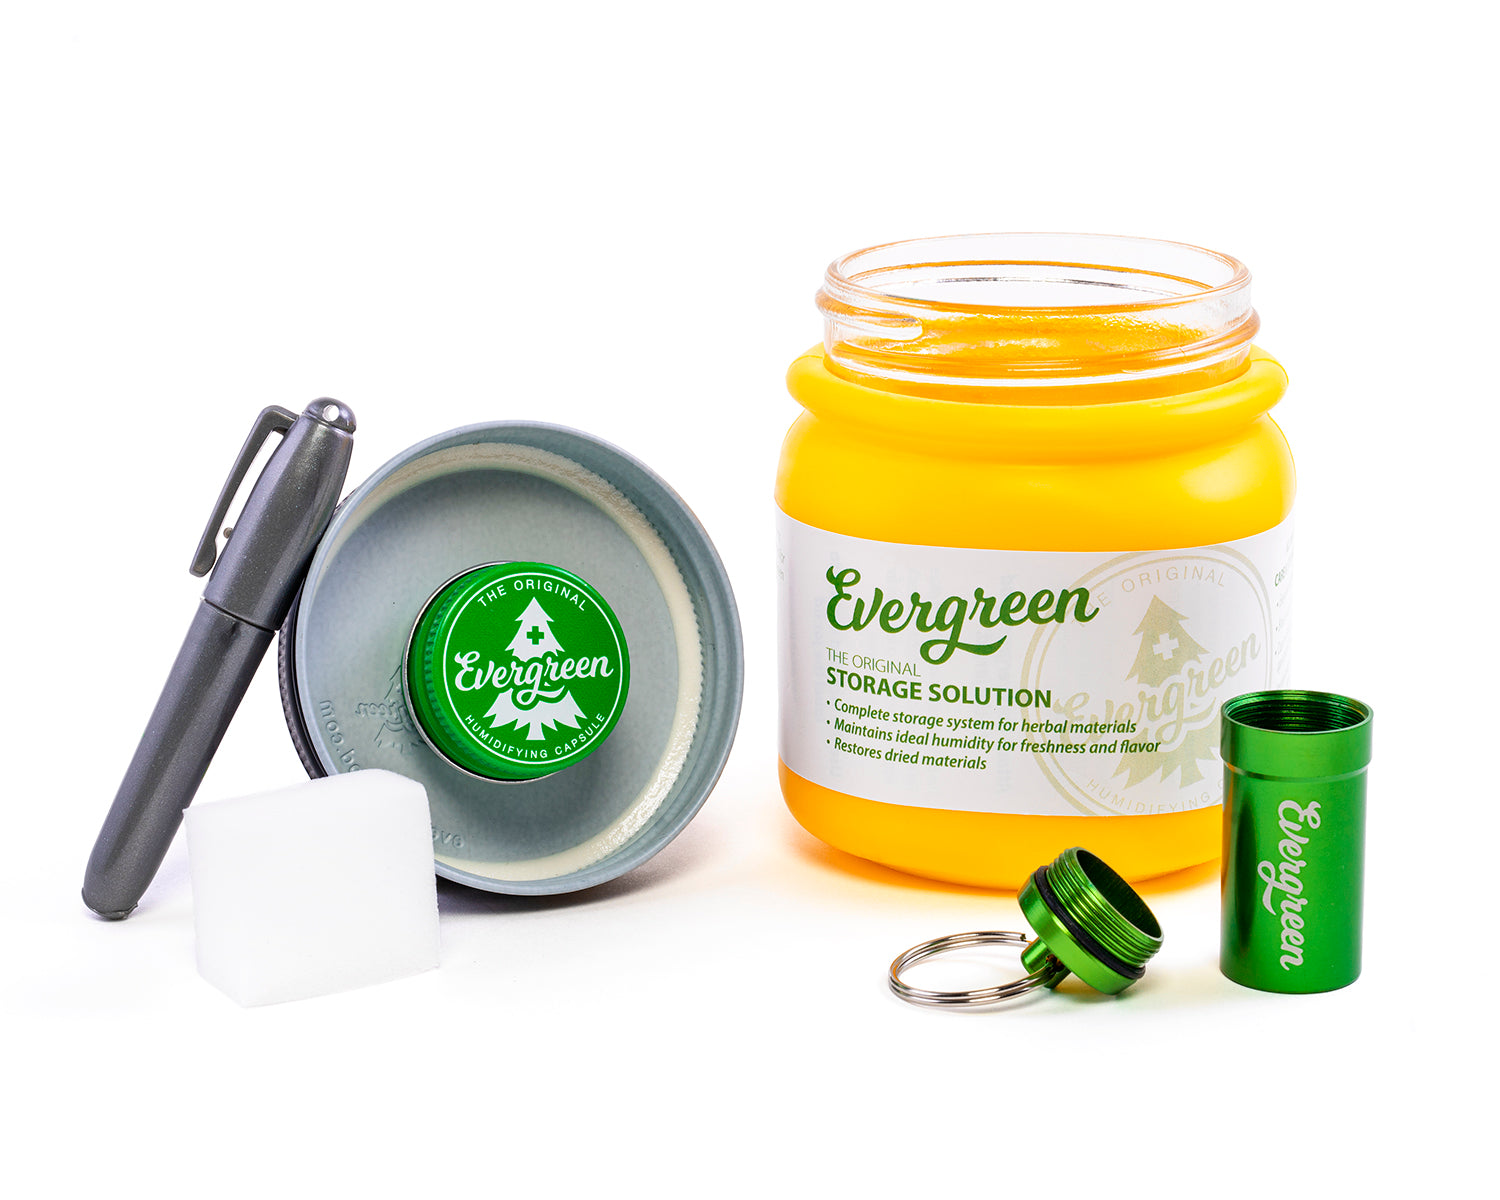 Evergreen Storage Solution open showing contents, yellow